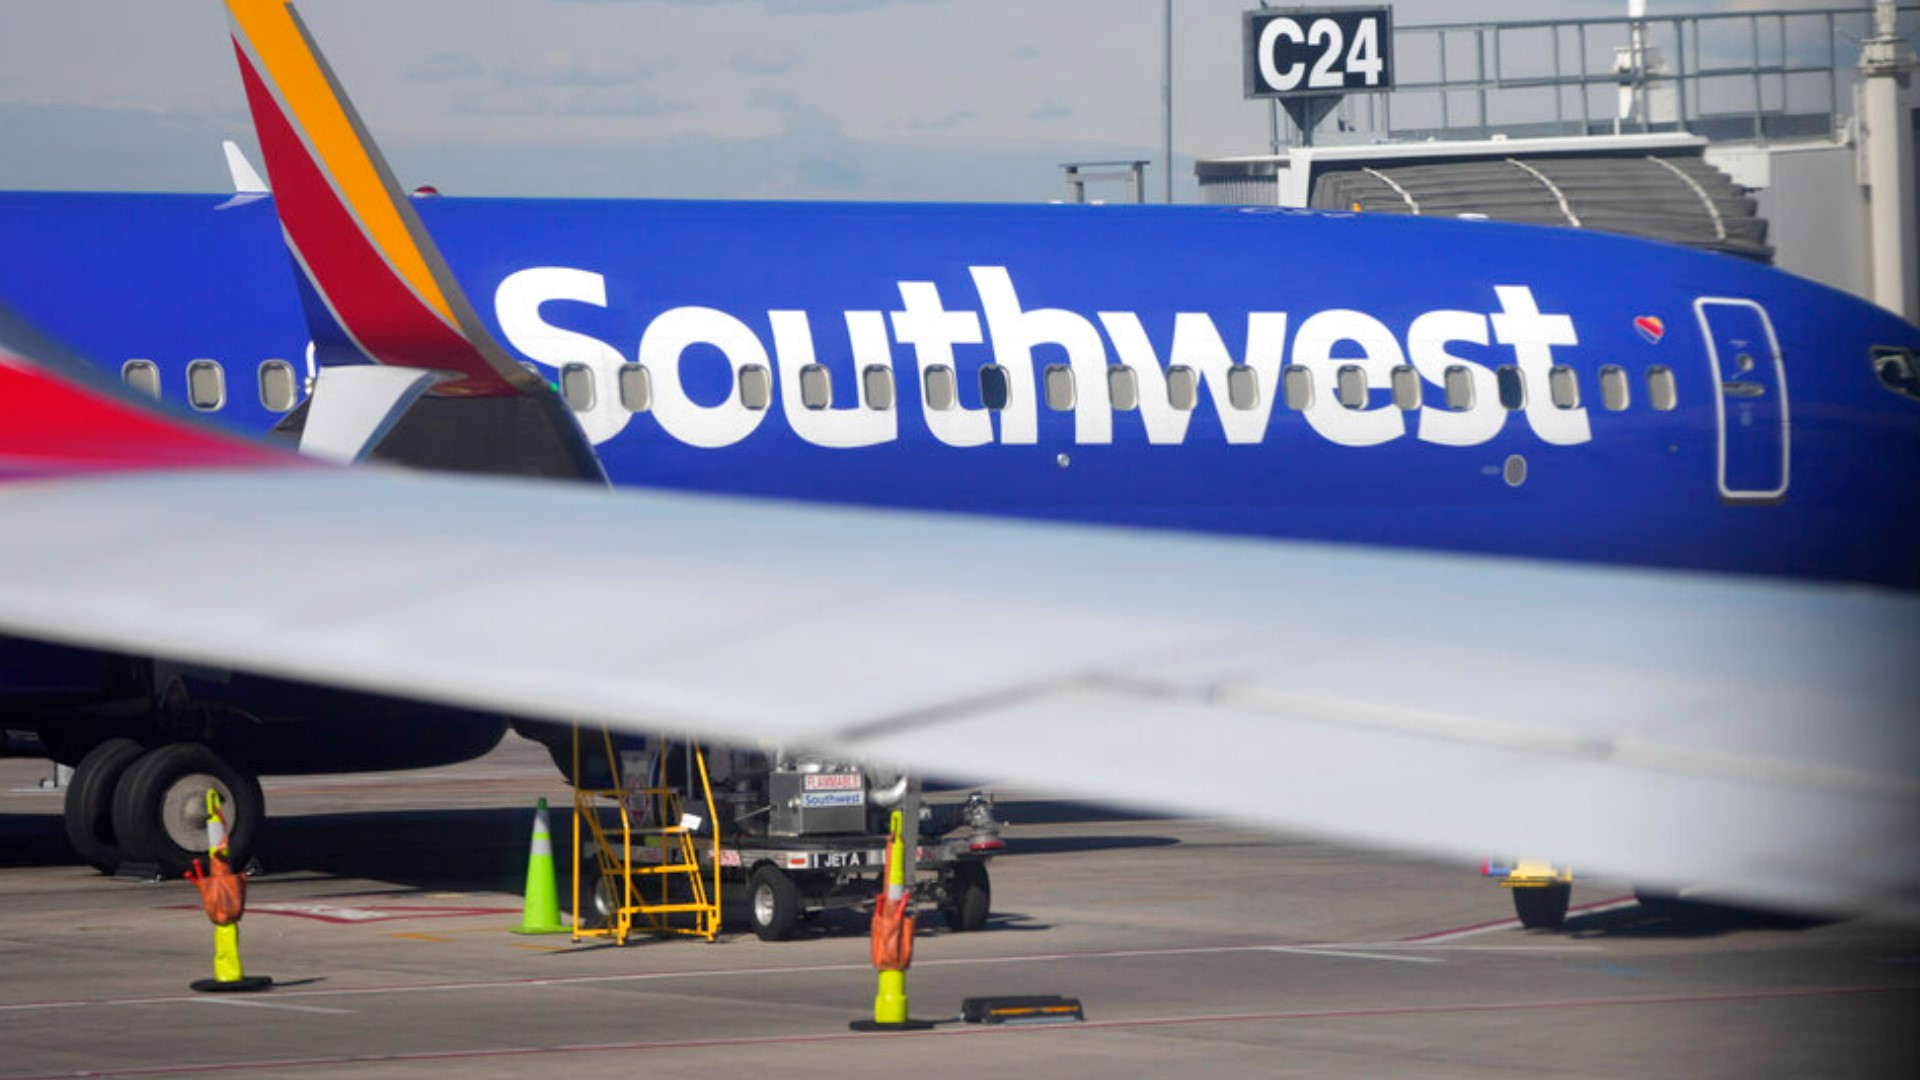 Christine Janning alleges that Southwest retaliated by grounding her after she reported Michael Haak to the company and the FBI.